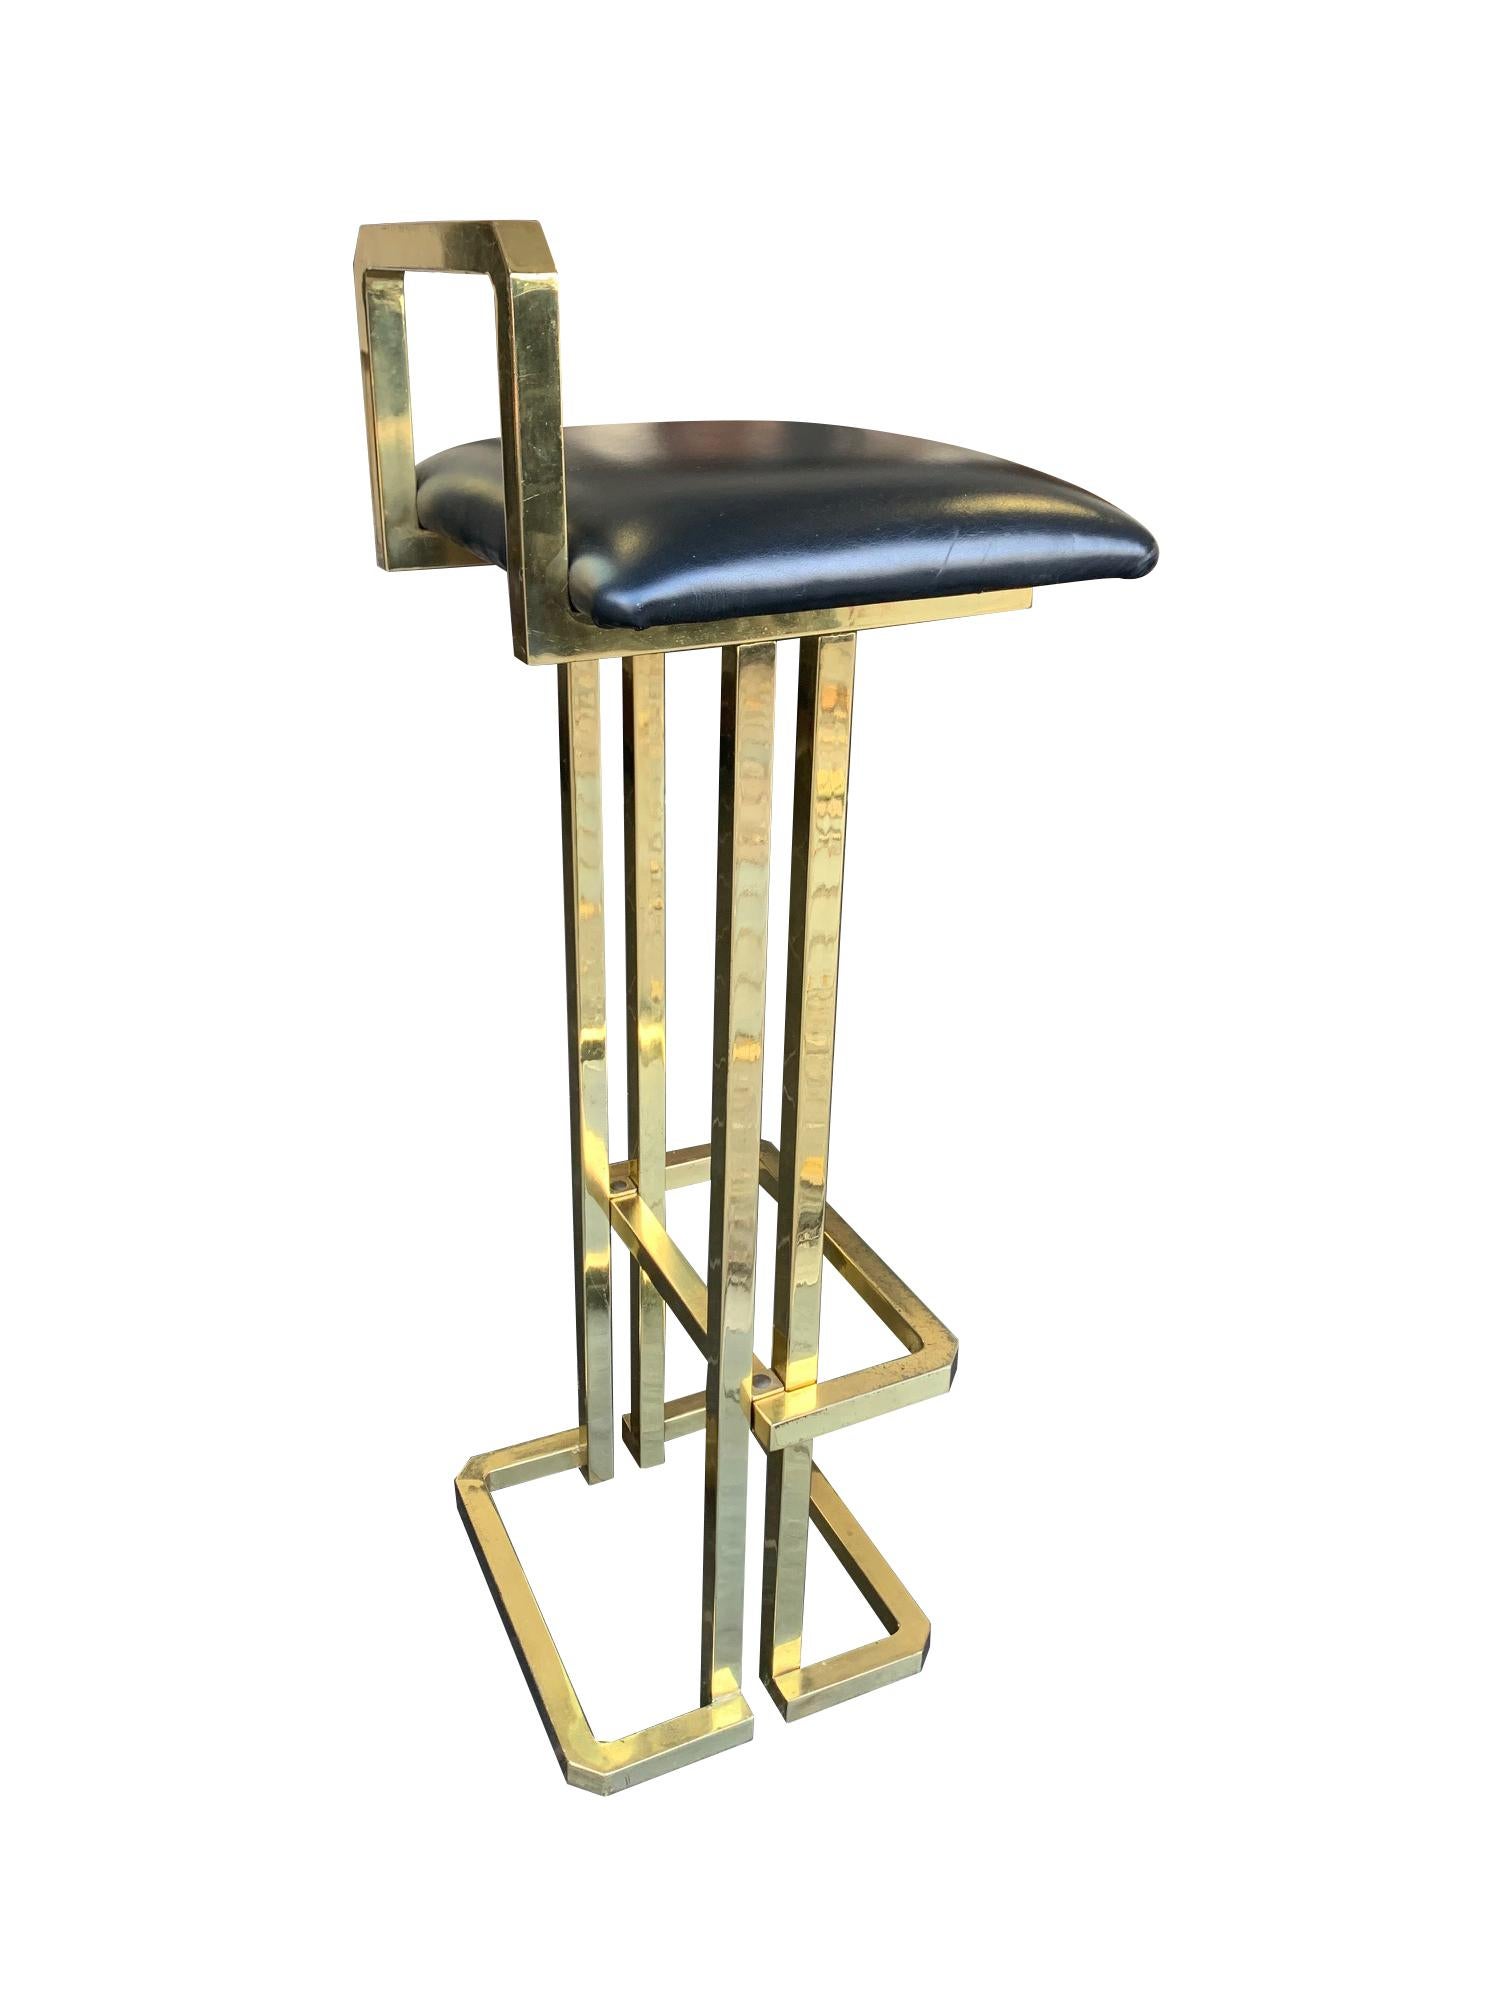 Set of 3 Maison Jansen Style Gilt Metal Stools with Black Leather Seat Pads For Sale 3